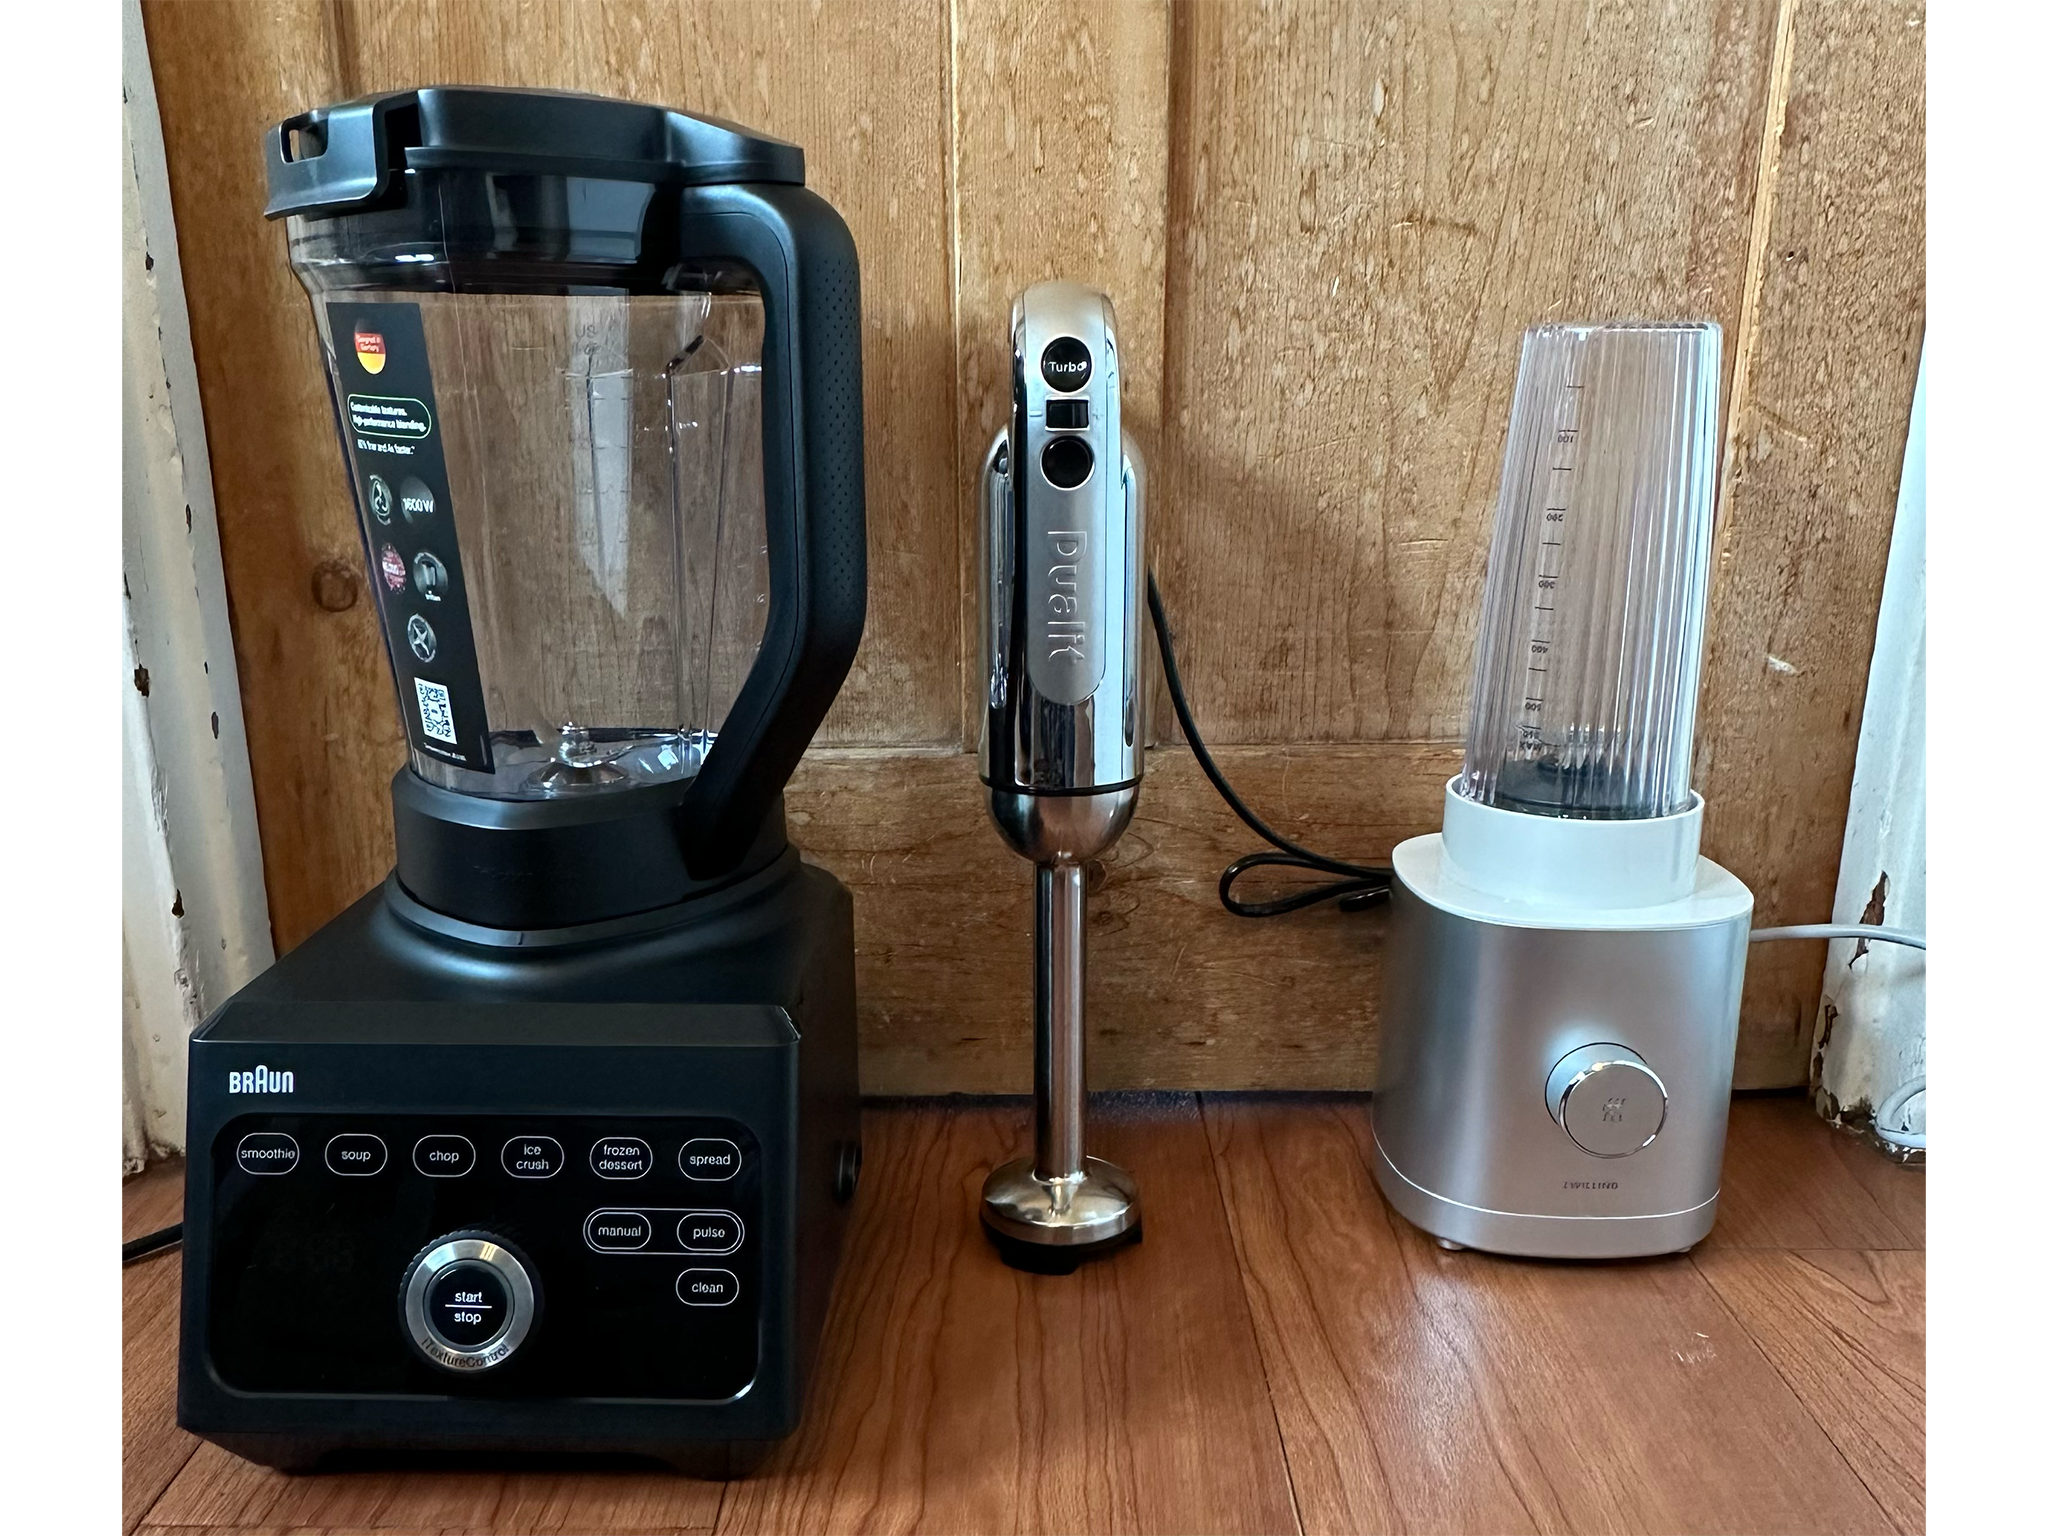 A selection of the best blenders that we tested for this review